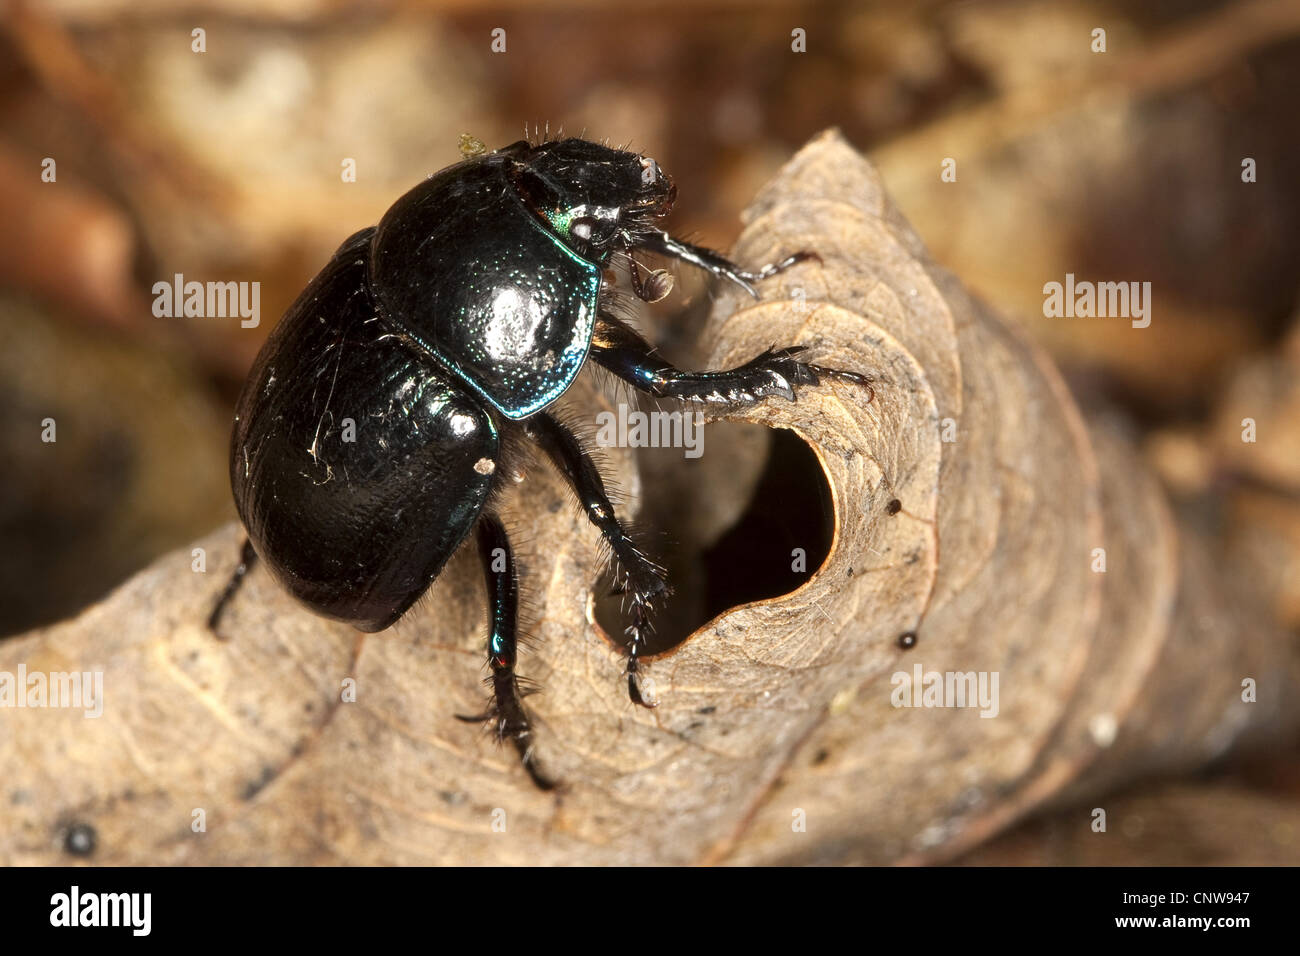 Rosskaefercommon dor beetle, dung beetles (Anoplotrupes stercorosus, Geotrupes stercorosus), at an autumn leaf, Germany Stock Photo